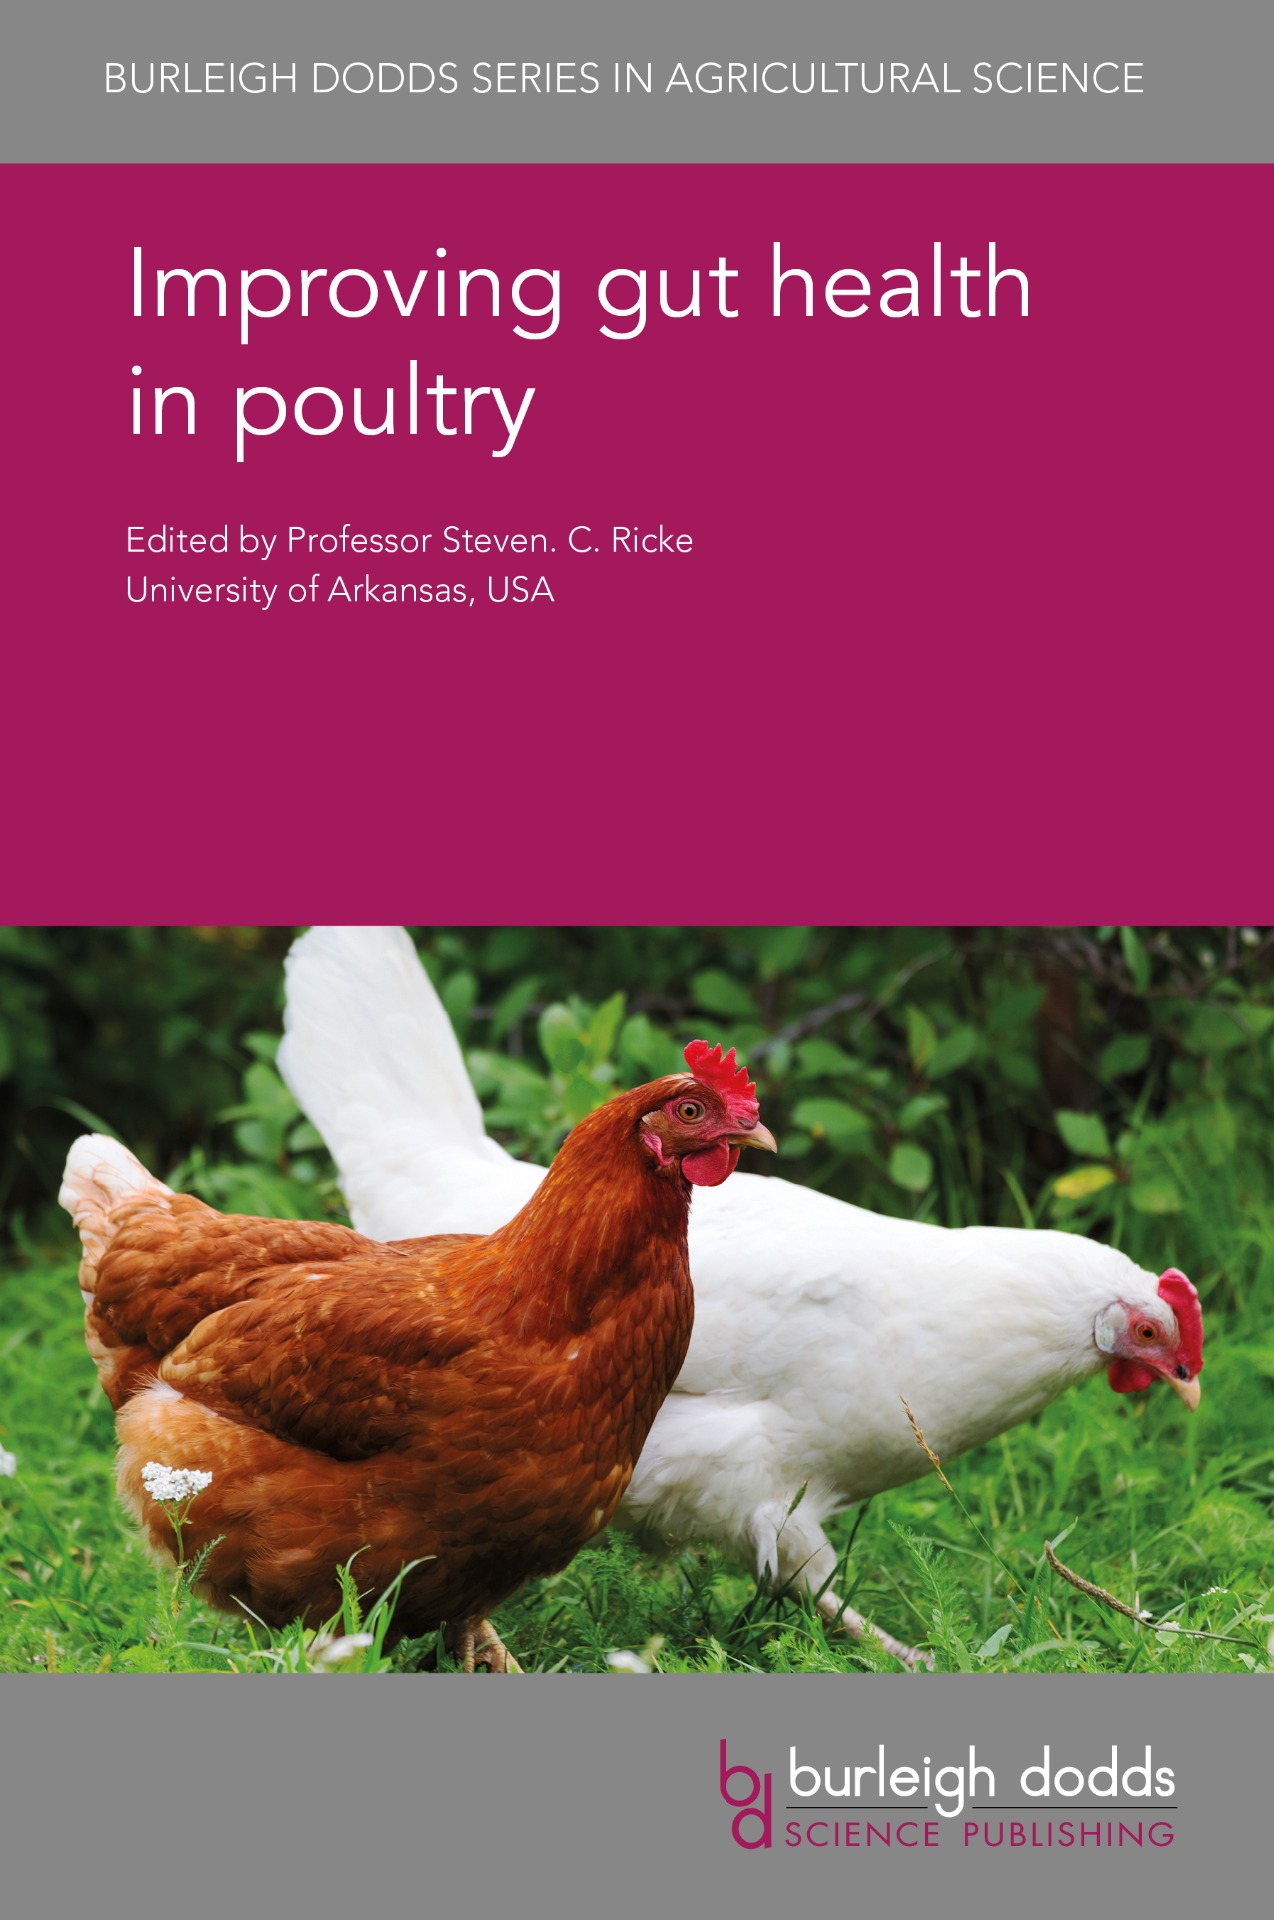 Improving gut health in poultry